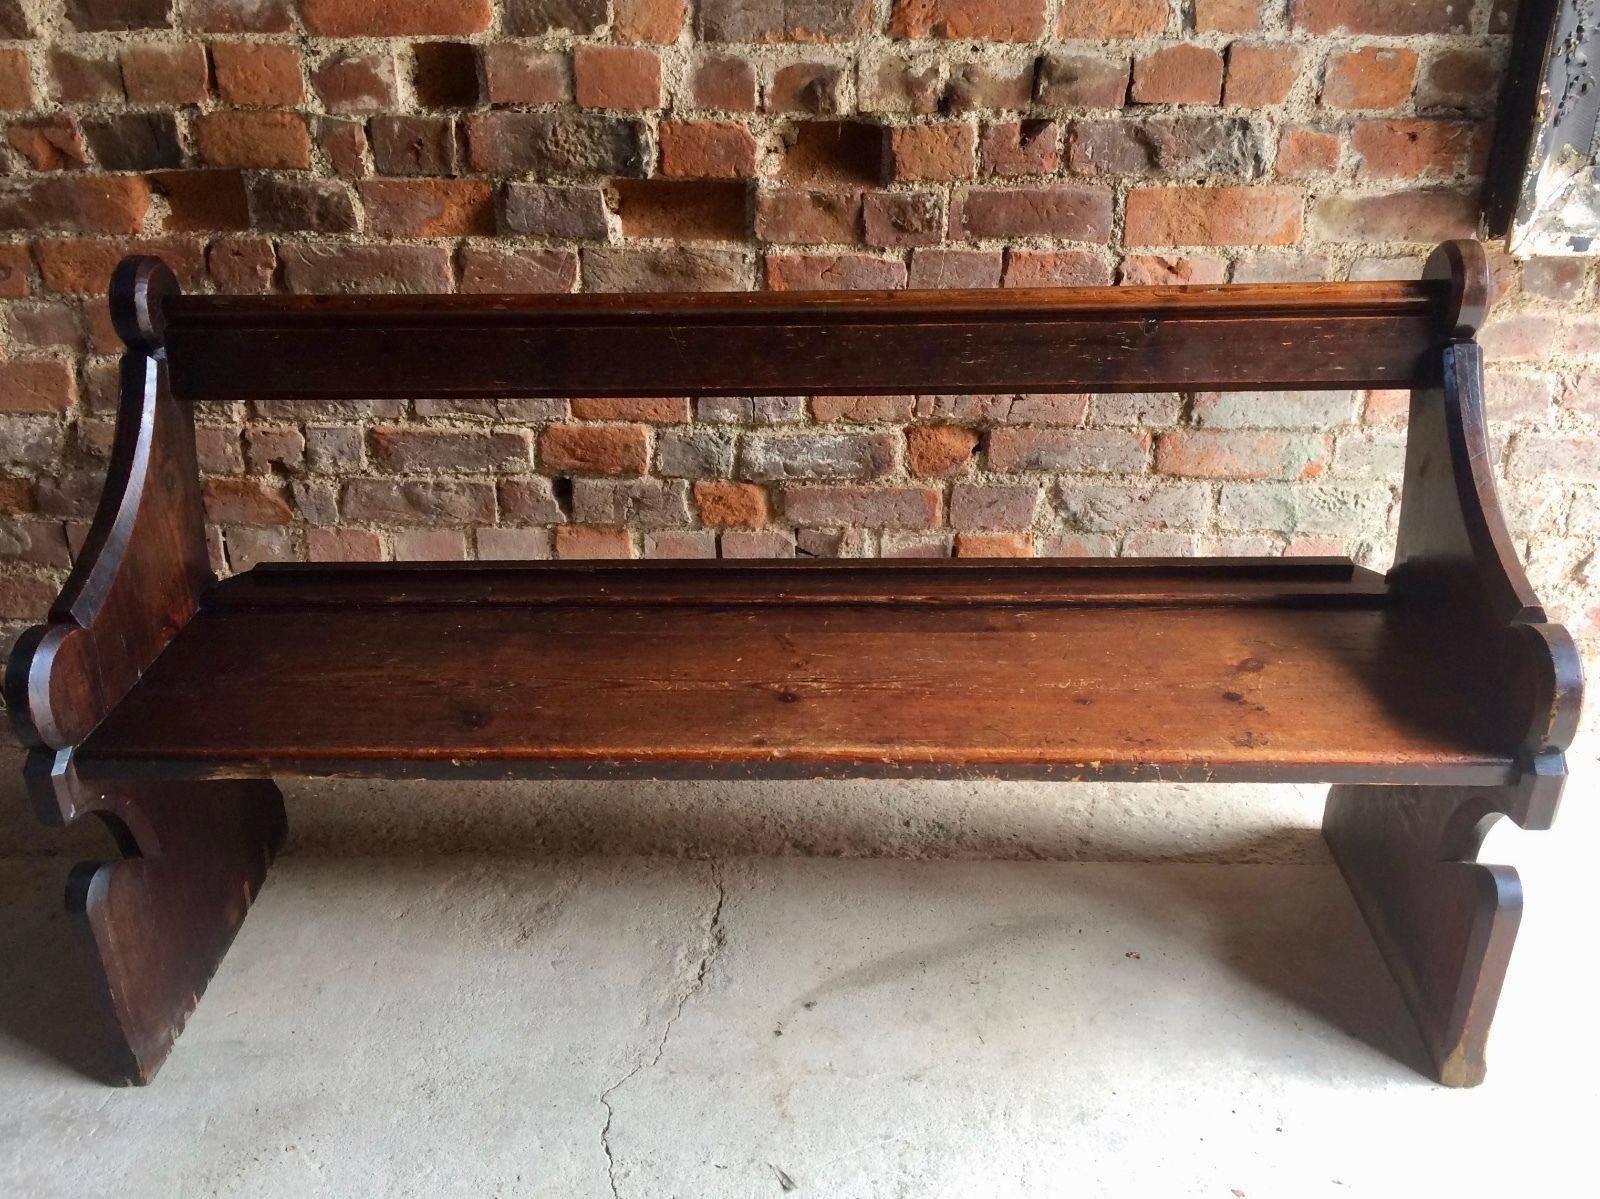 A beautiful antique pine 19th-20th century church pew, the bench is full of charm and character and would make ideal seating for a rustic dining table.